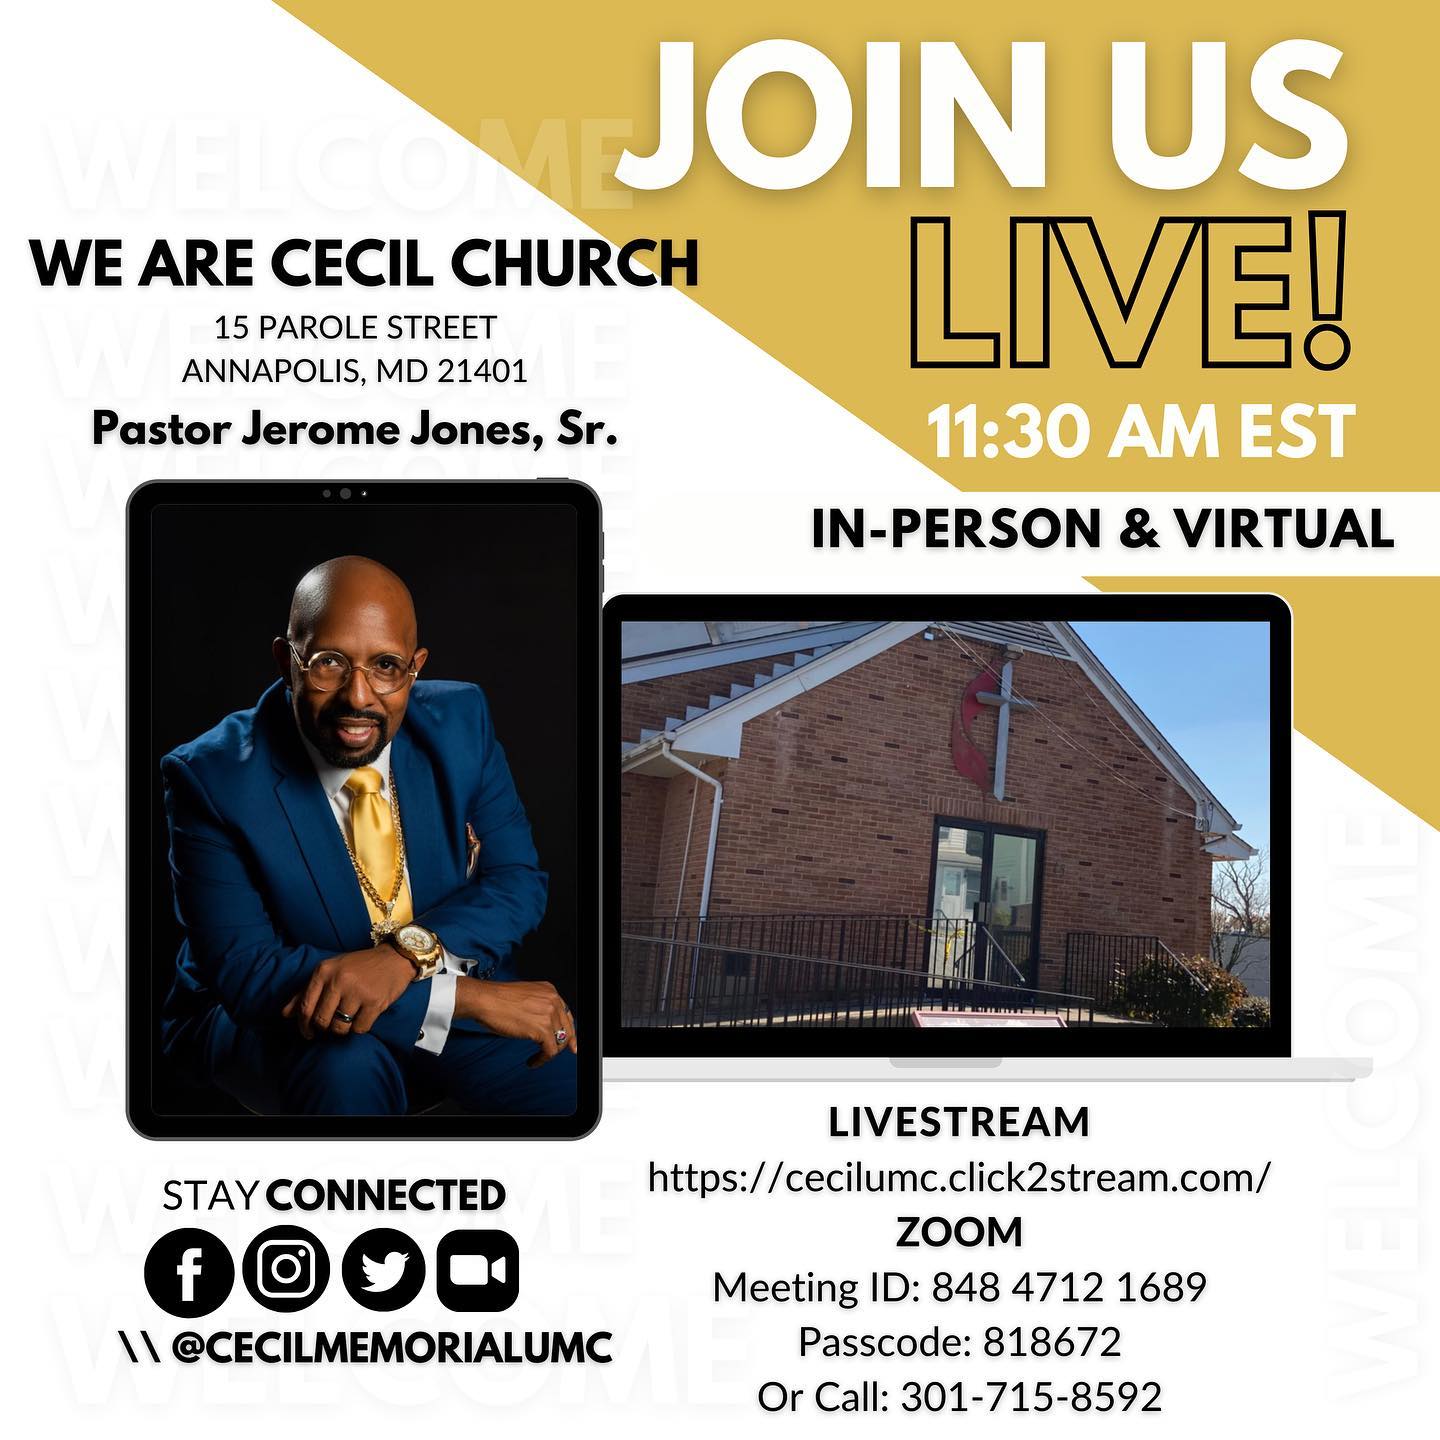 Join us Live at Cecil Church